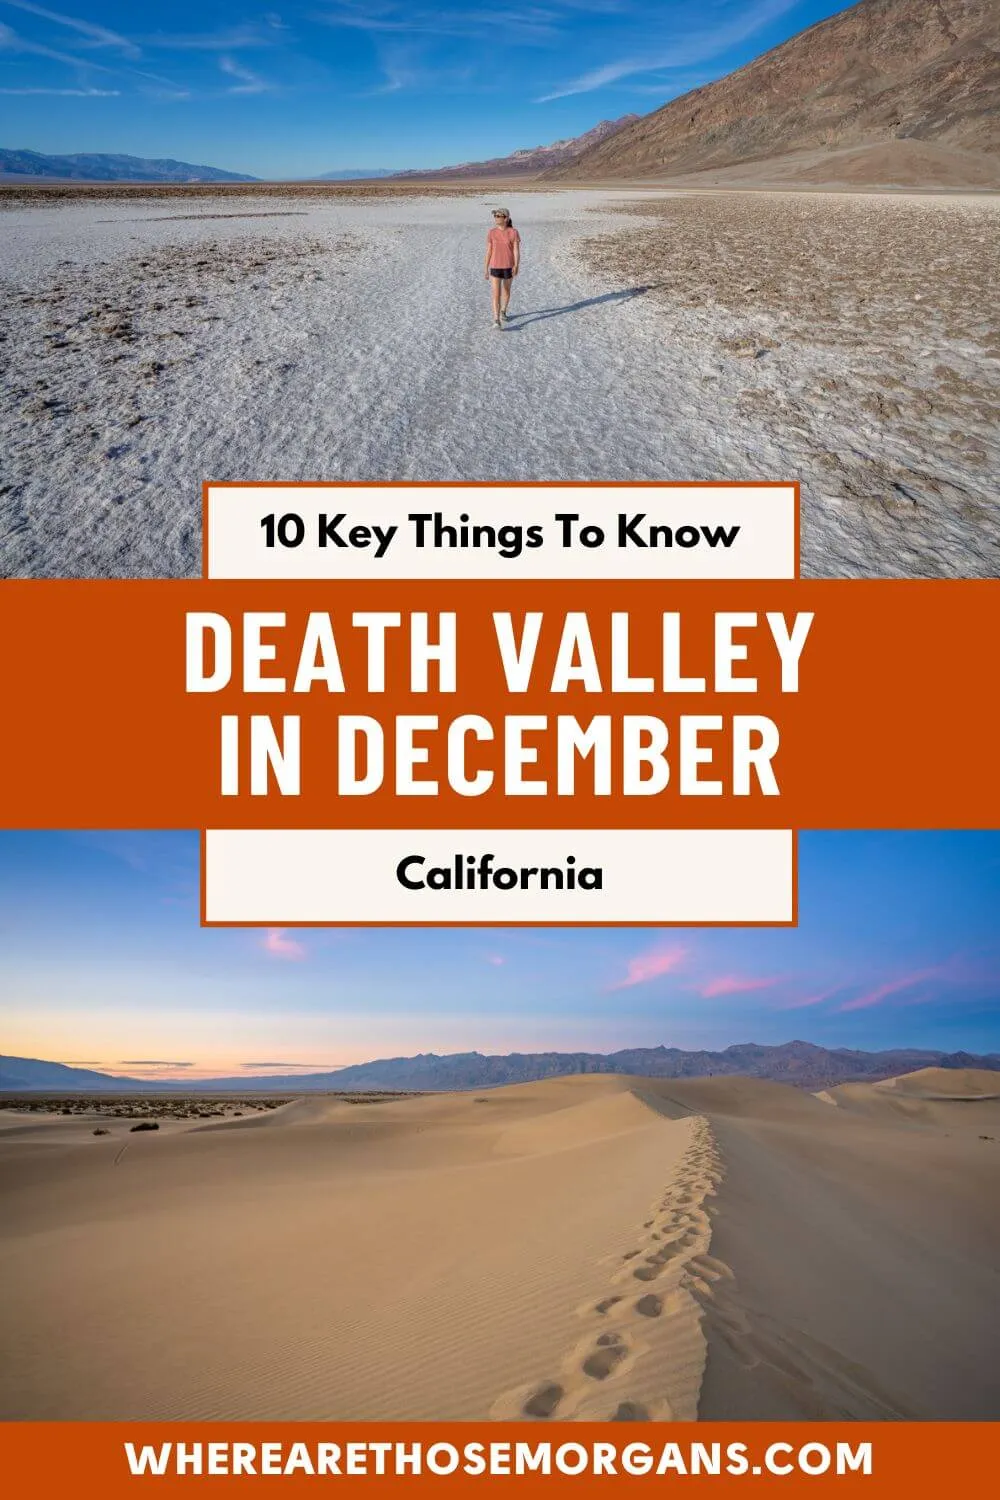 The most important things you need to know about visiting Death Valley National Park in December, including crowds, weather, hotels, hiking and much more.